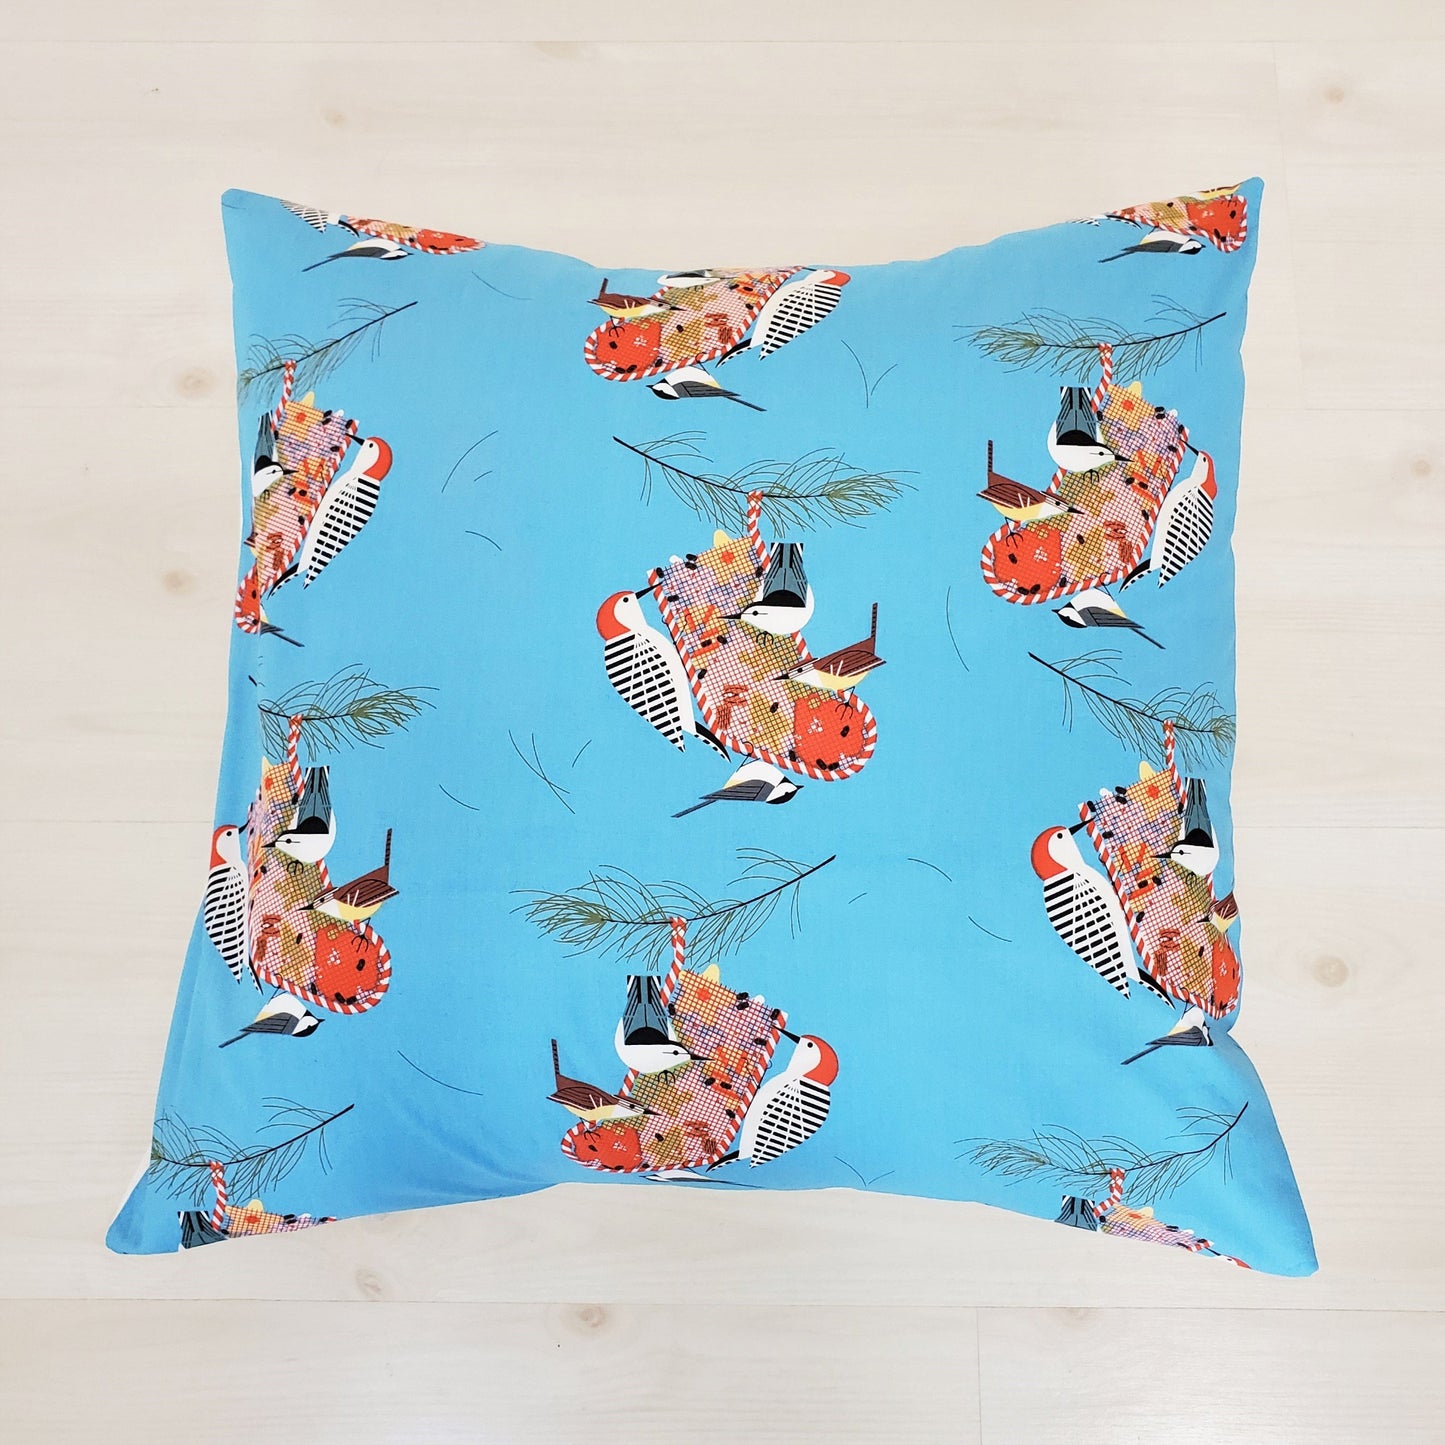 Organic Cotton Accent Pillow Covers in Charley Harper Prints